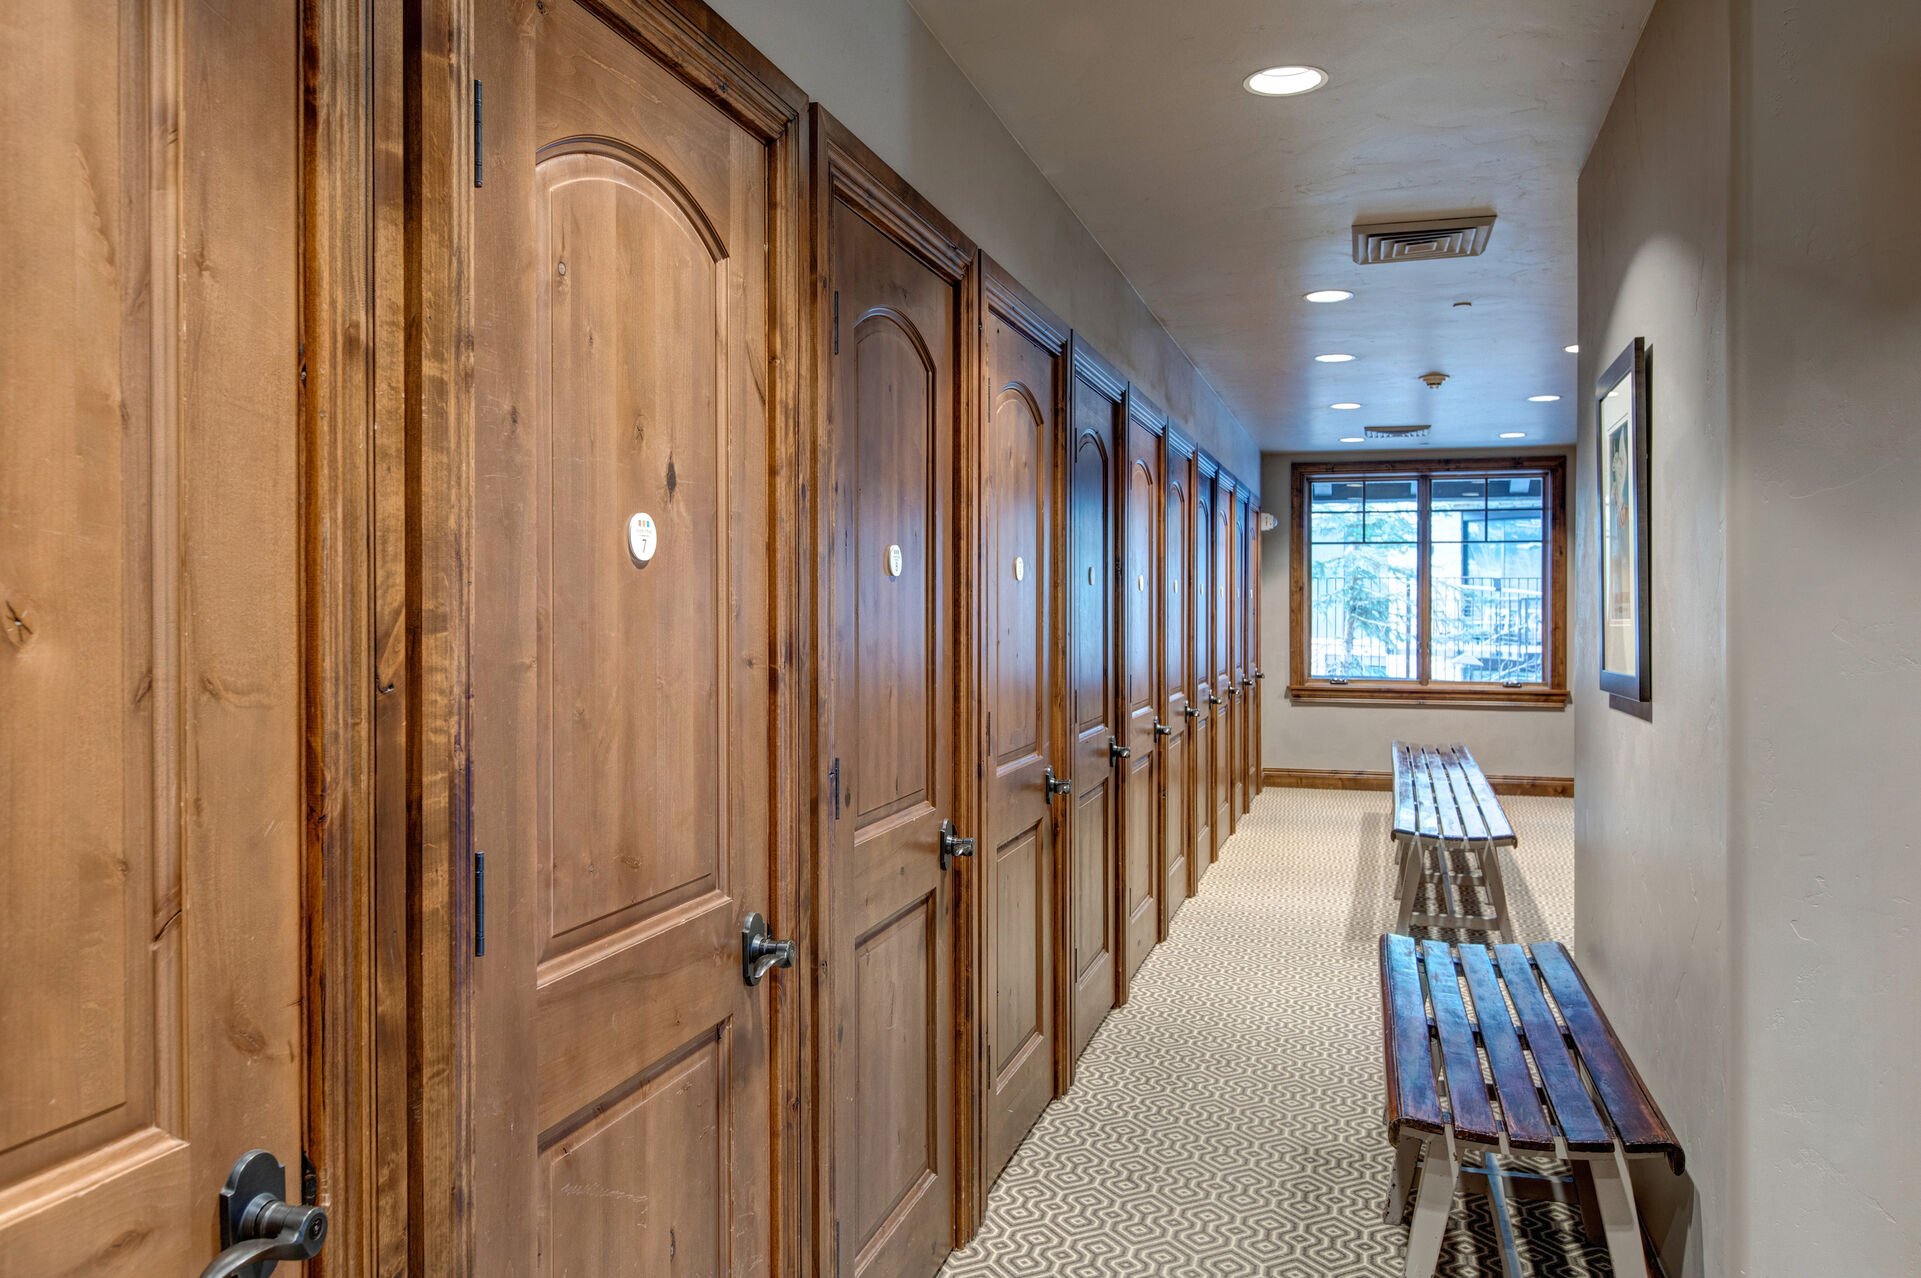 Ski Locker Room Located off the Skier's Lounge - Private Ski Locker with Two Boot Warmers